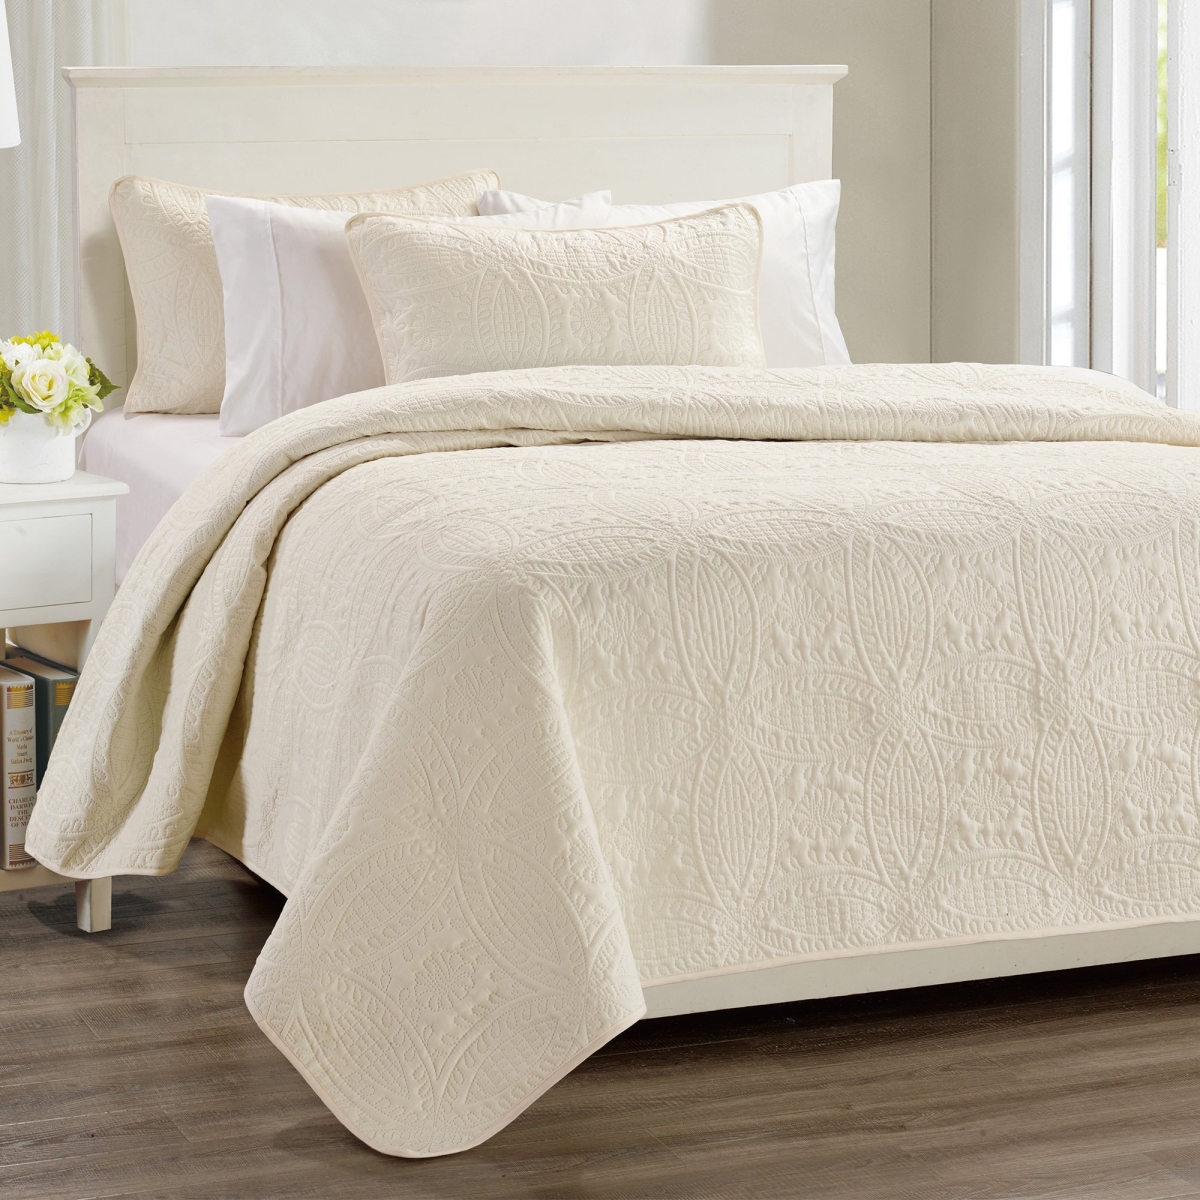 Sq-ve-chbly-q03-hgr 3 Piece Millano Chambrey Quilt Set, Ivory - Queen Size